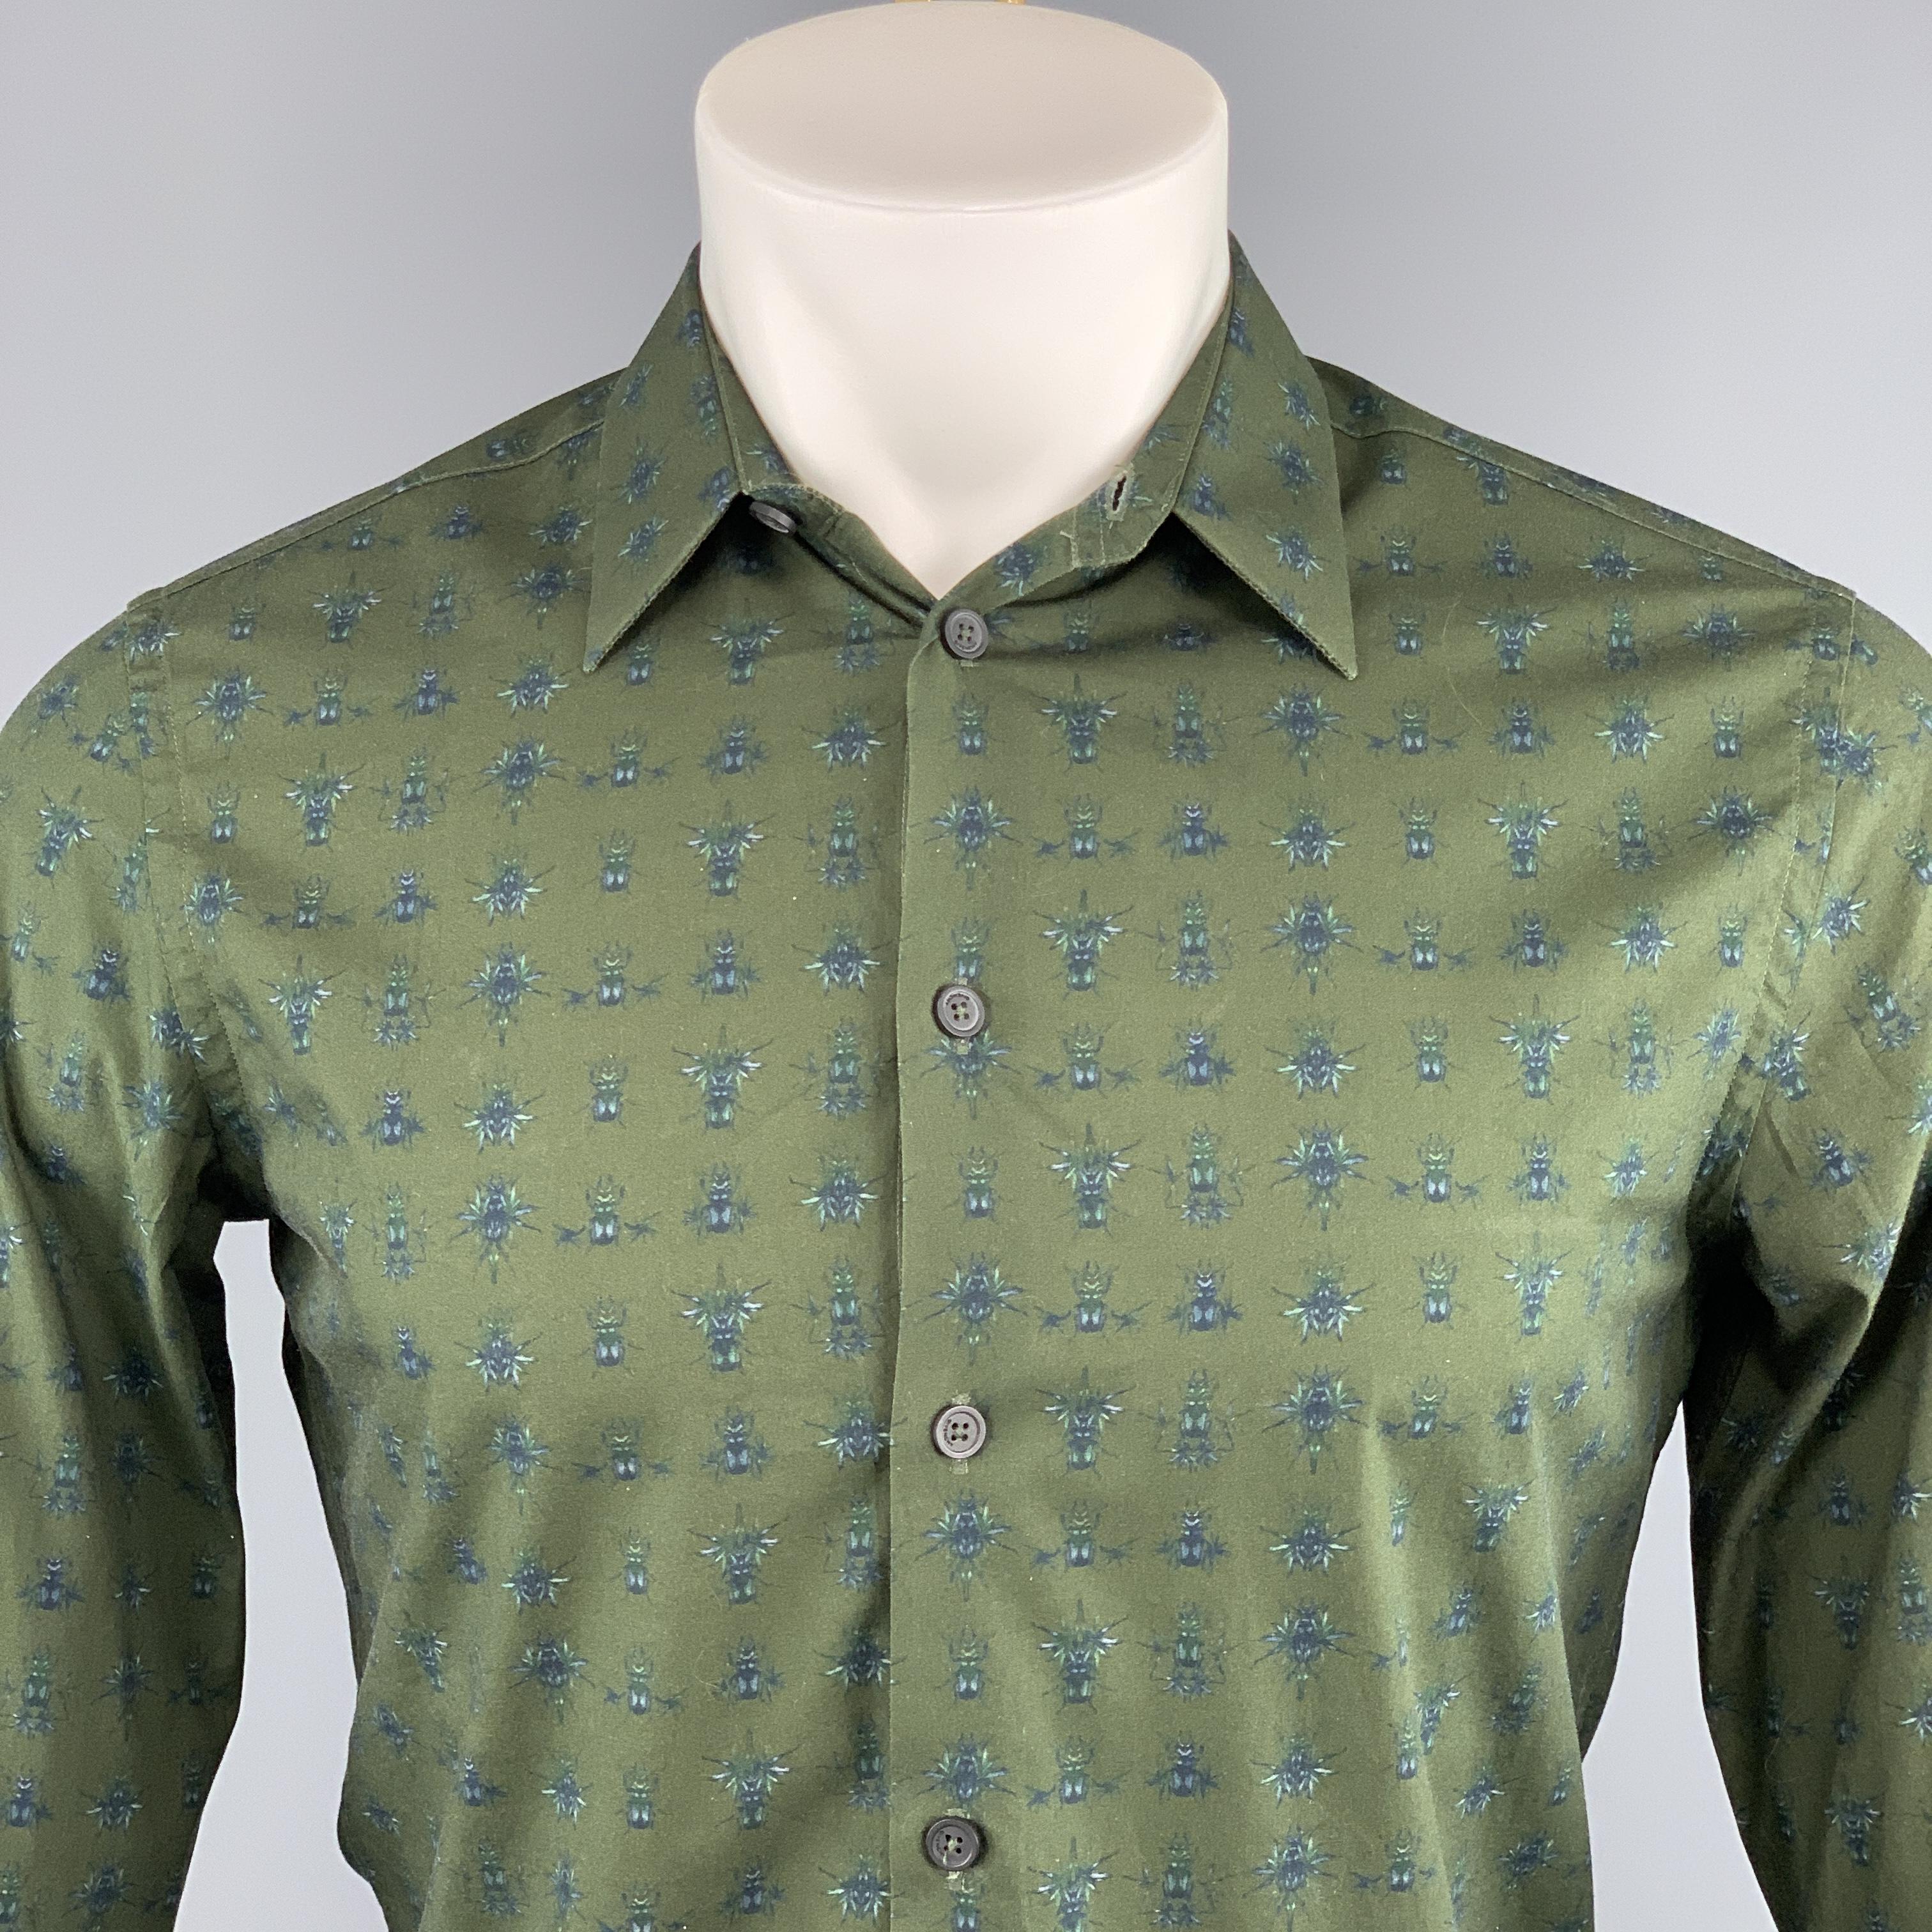 GIVENCHY Long Sleeve Shirt comes in a olive scarab print cotton featuring a button up style and a spread collar. Made in Portugal.
 

Excellent Pre-Owned Condition.
Marked: 38

Measurements:

Shoulder: 15.5 in. 
Chest: 38 in. 
Sleeve: 26 in.